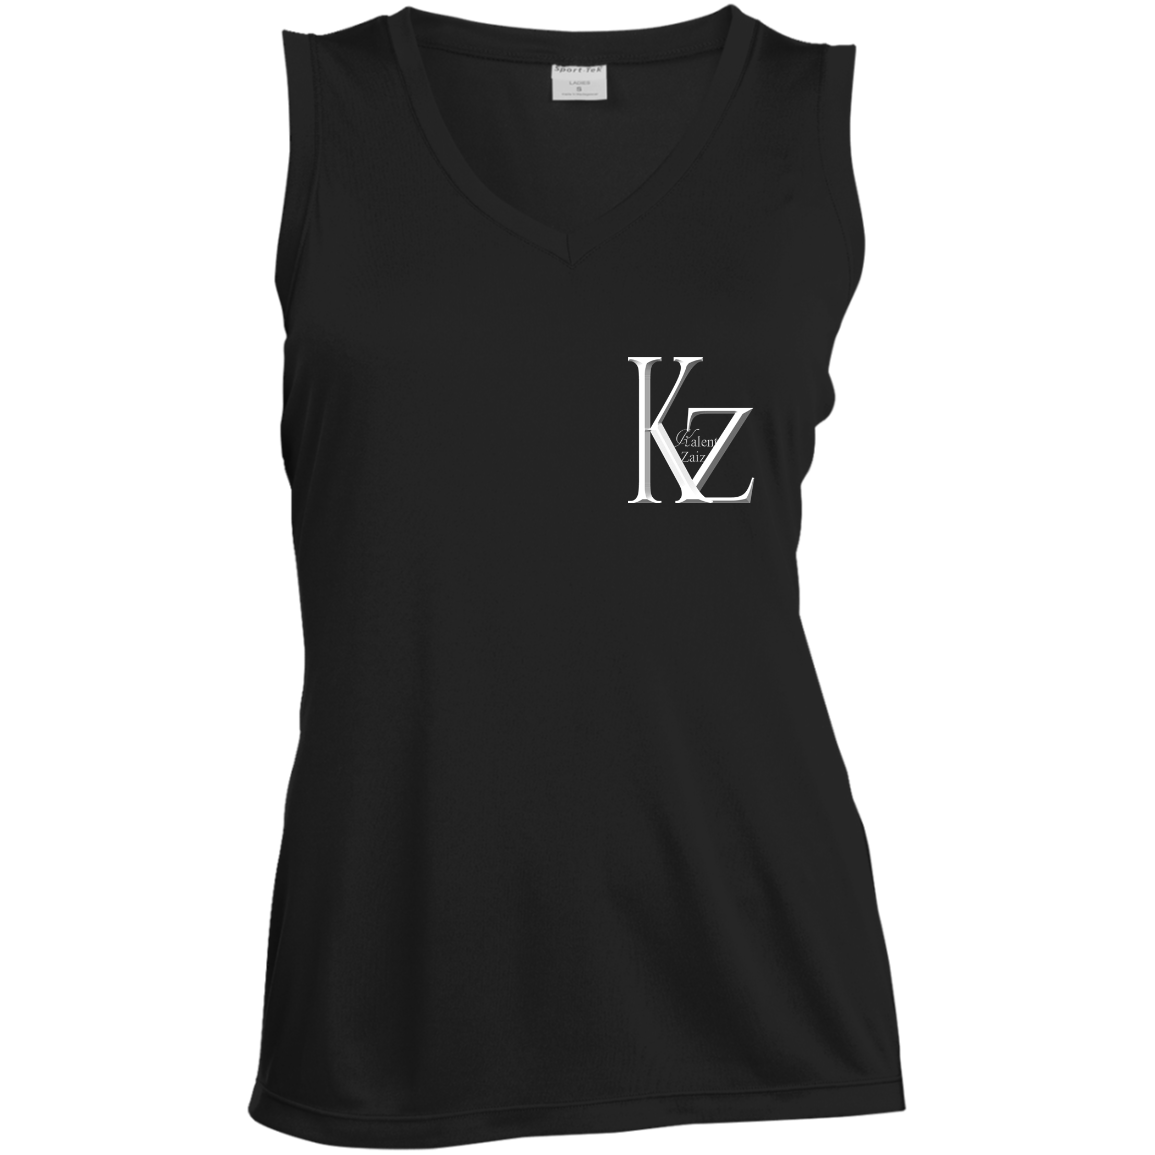 Kalent Zaiz Black LST352 Ladies' Sleeveless Moisture Absorbing V-Neck  3.8-ounce, 100% polyester interlock with PosiCharge technology Gently contoured silhouette Double-needle armholes and hem Decoration type: Digital Print